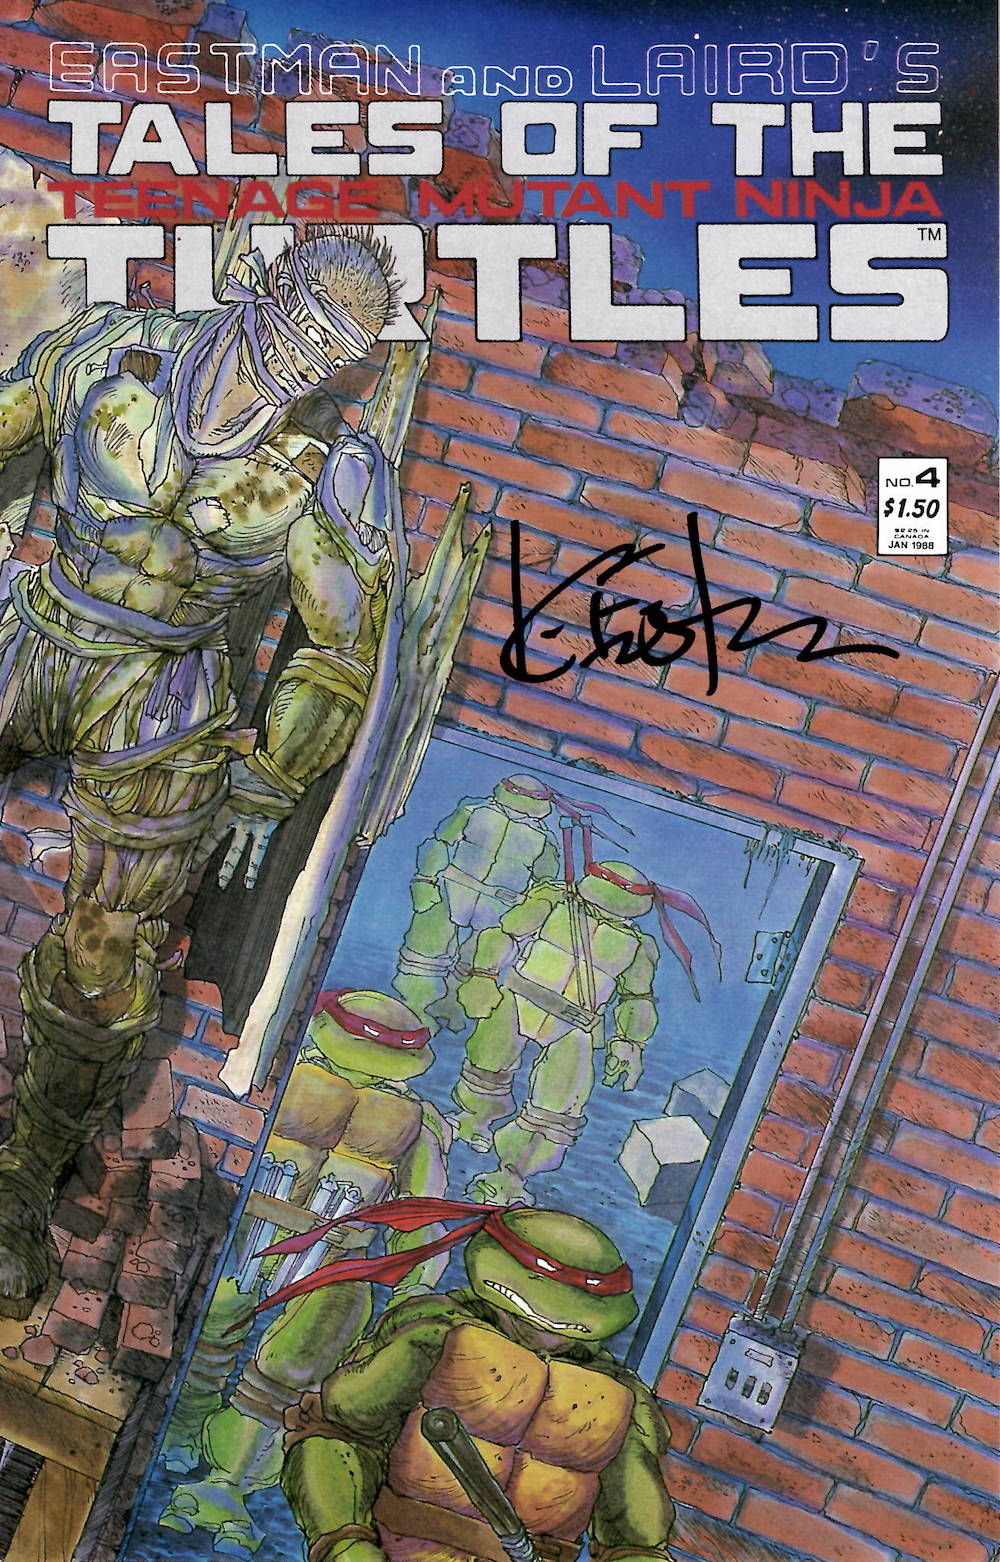 *** Tales of The TMNT No. 4 – Signed by Kevin